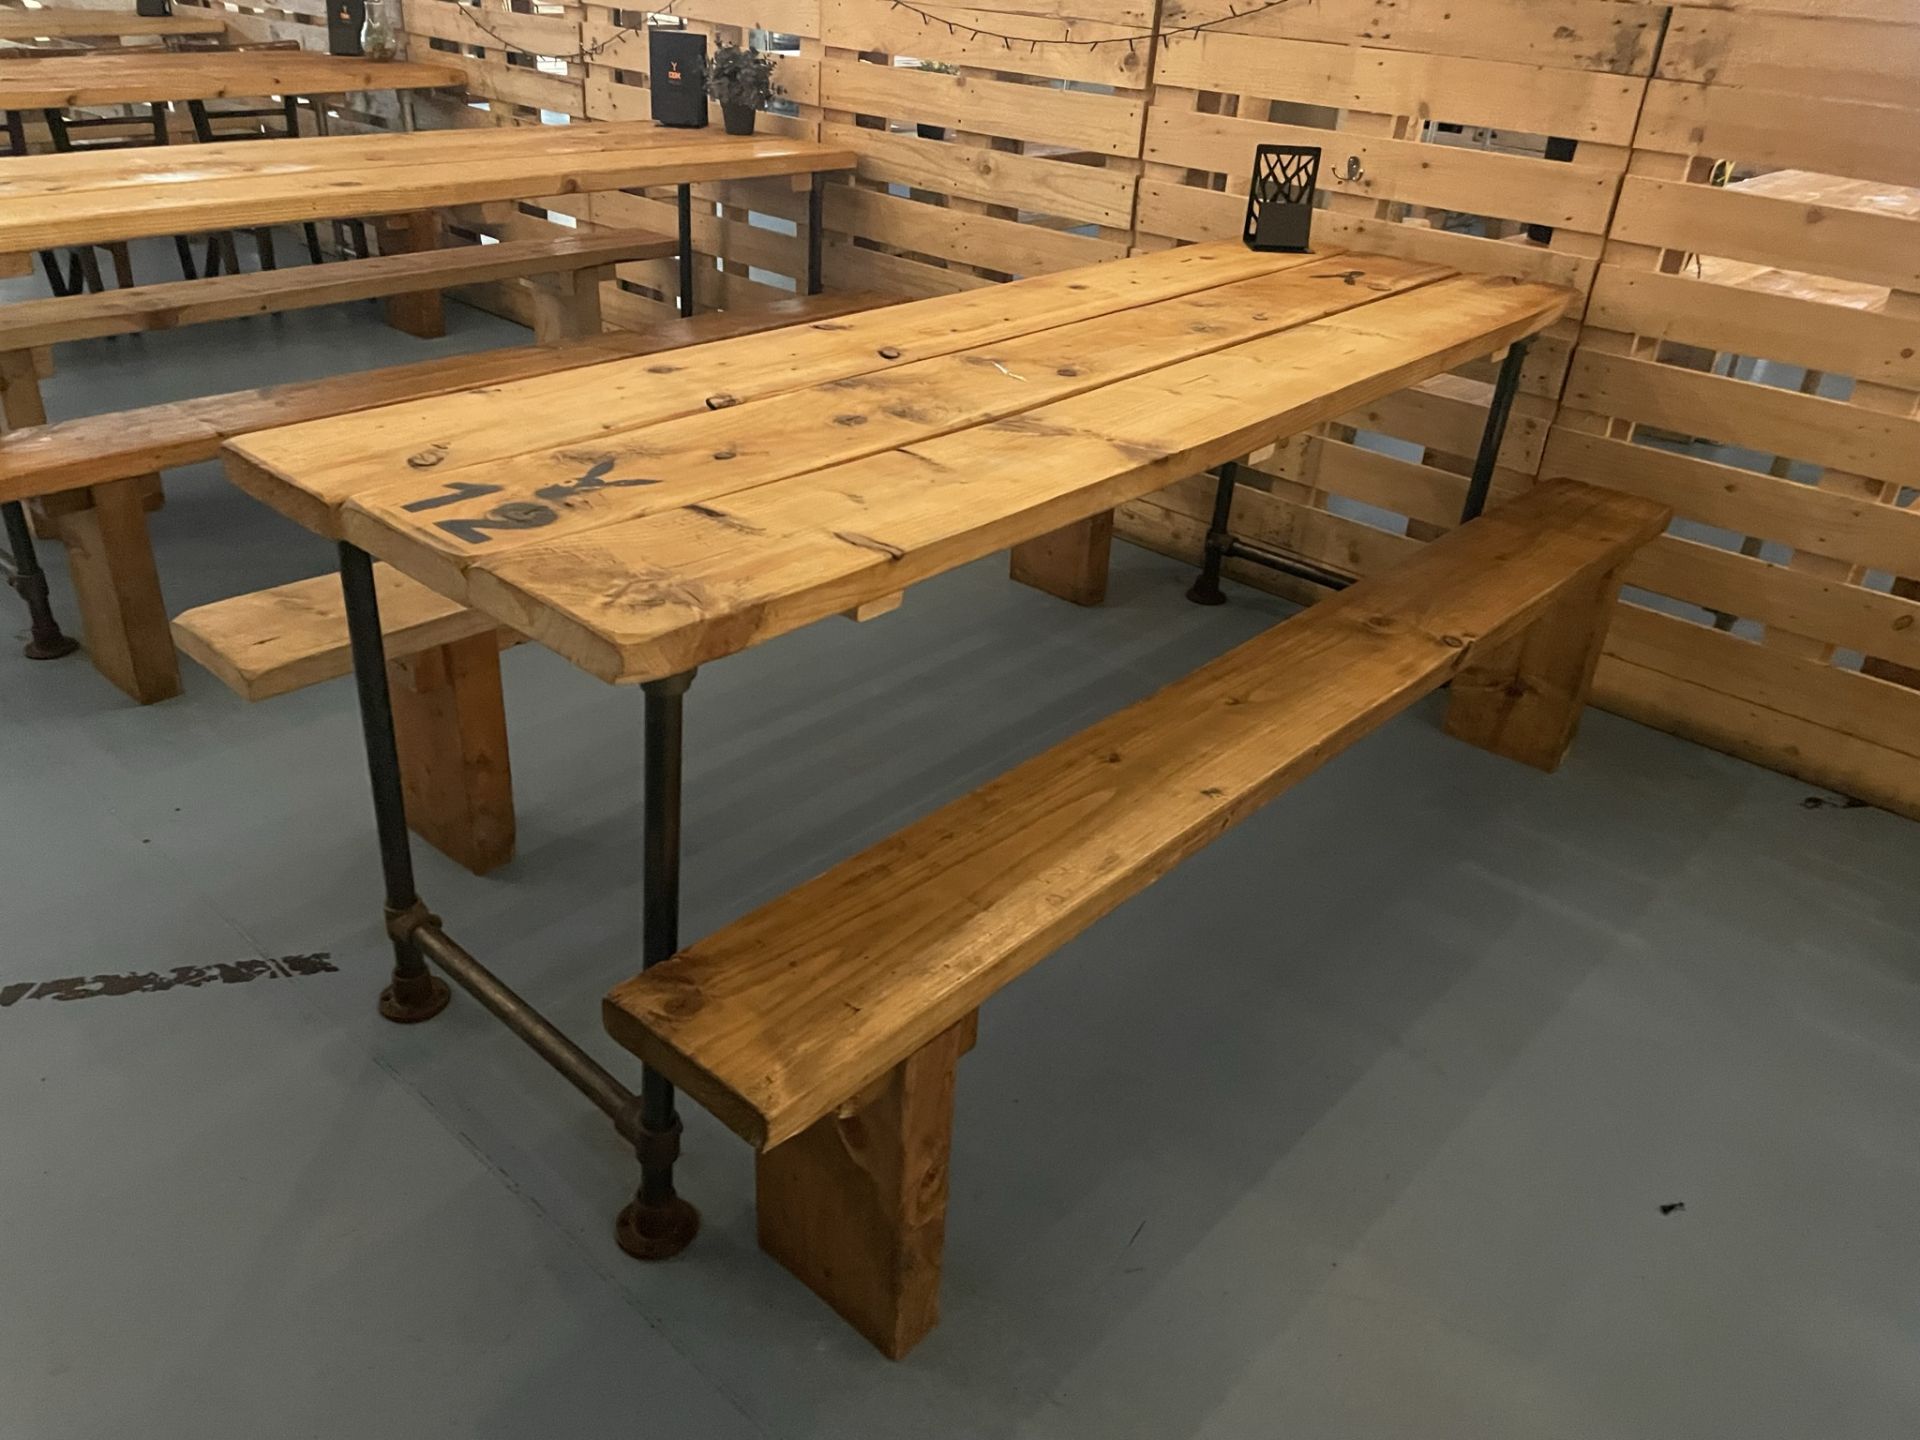 6 x Wooden Dining Tables w/ Metal Frames & 12 x Wooden Seating Benches - Image 2 of 6